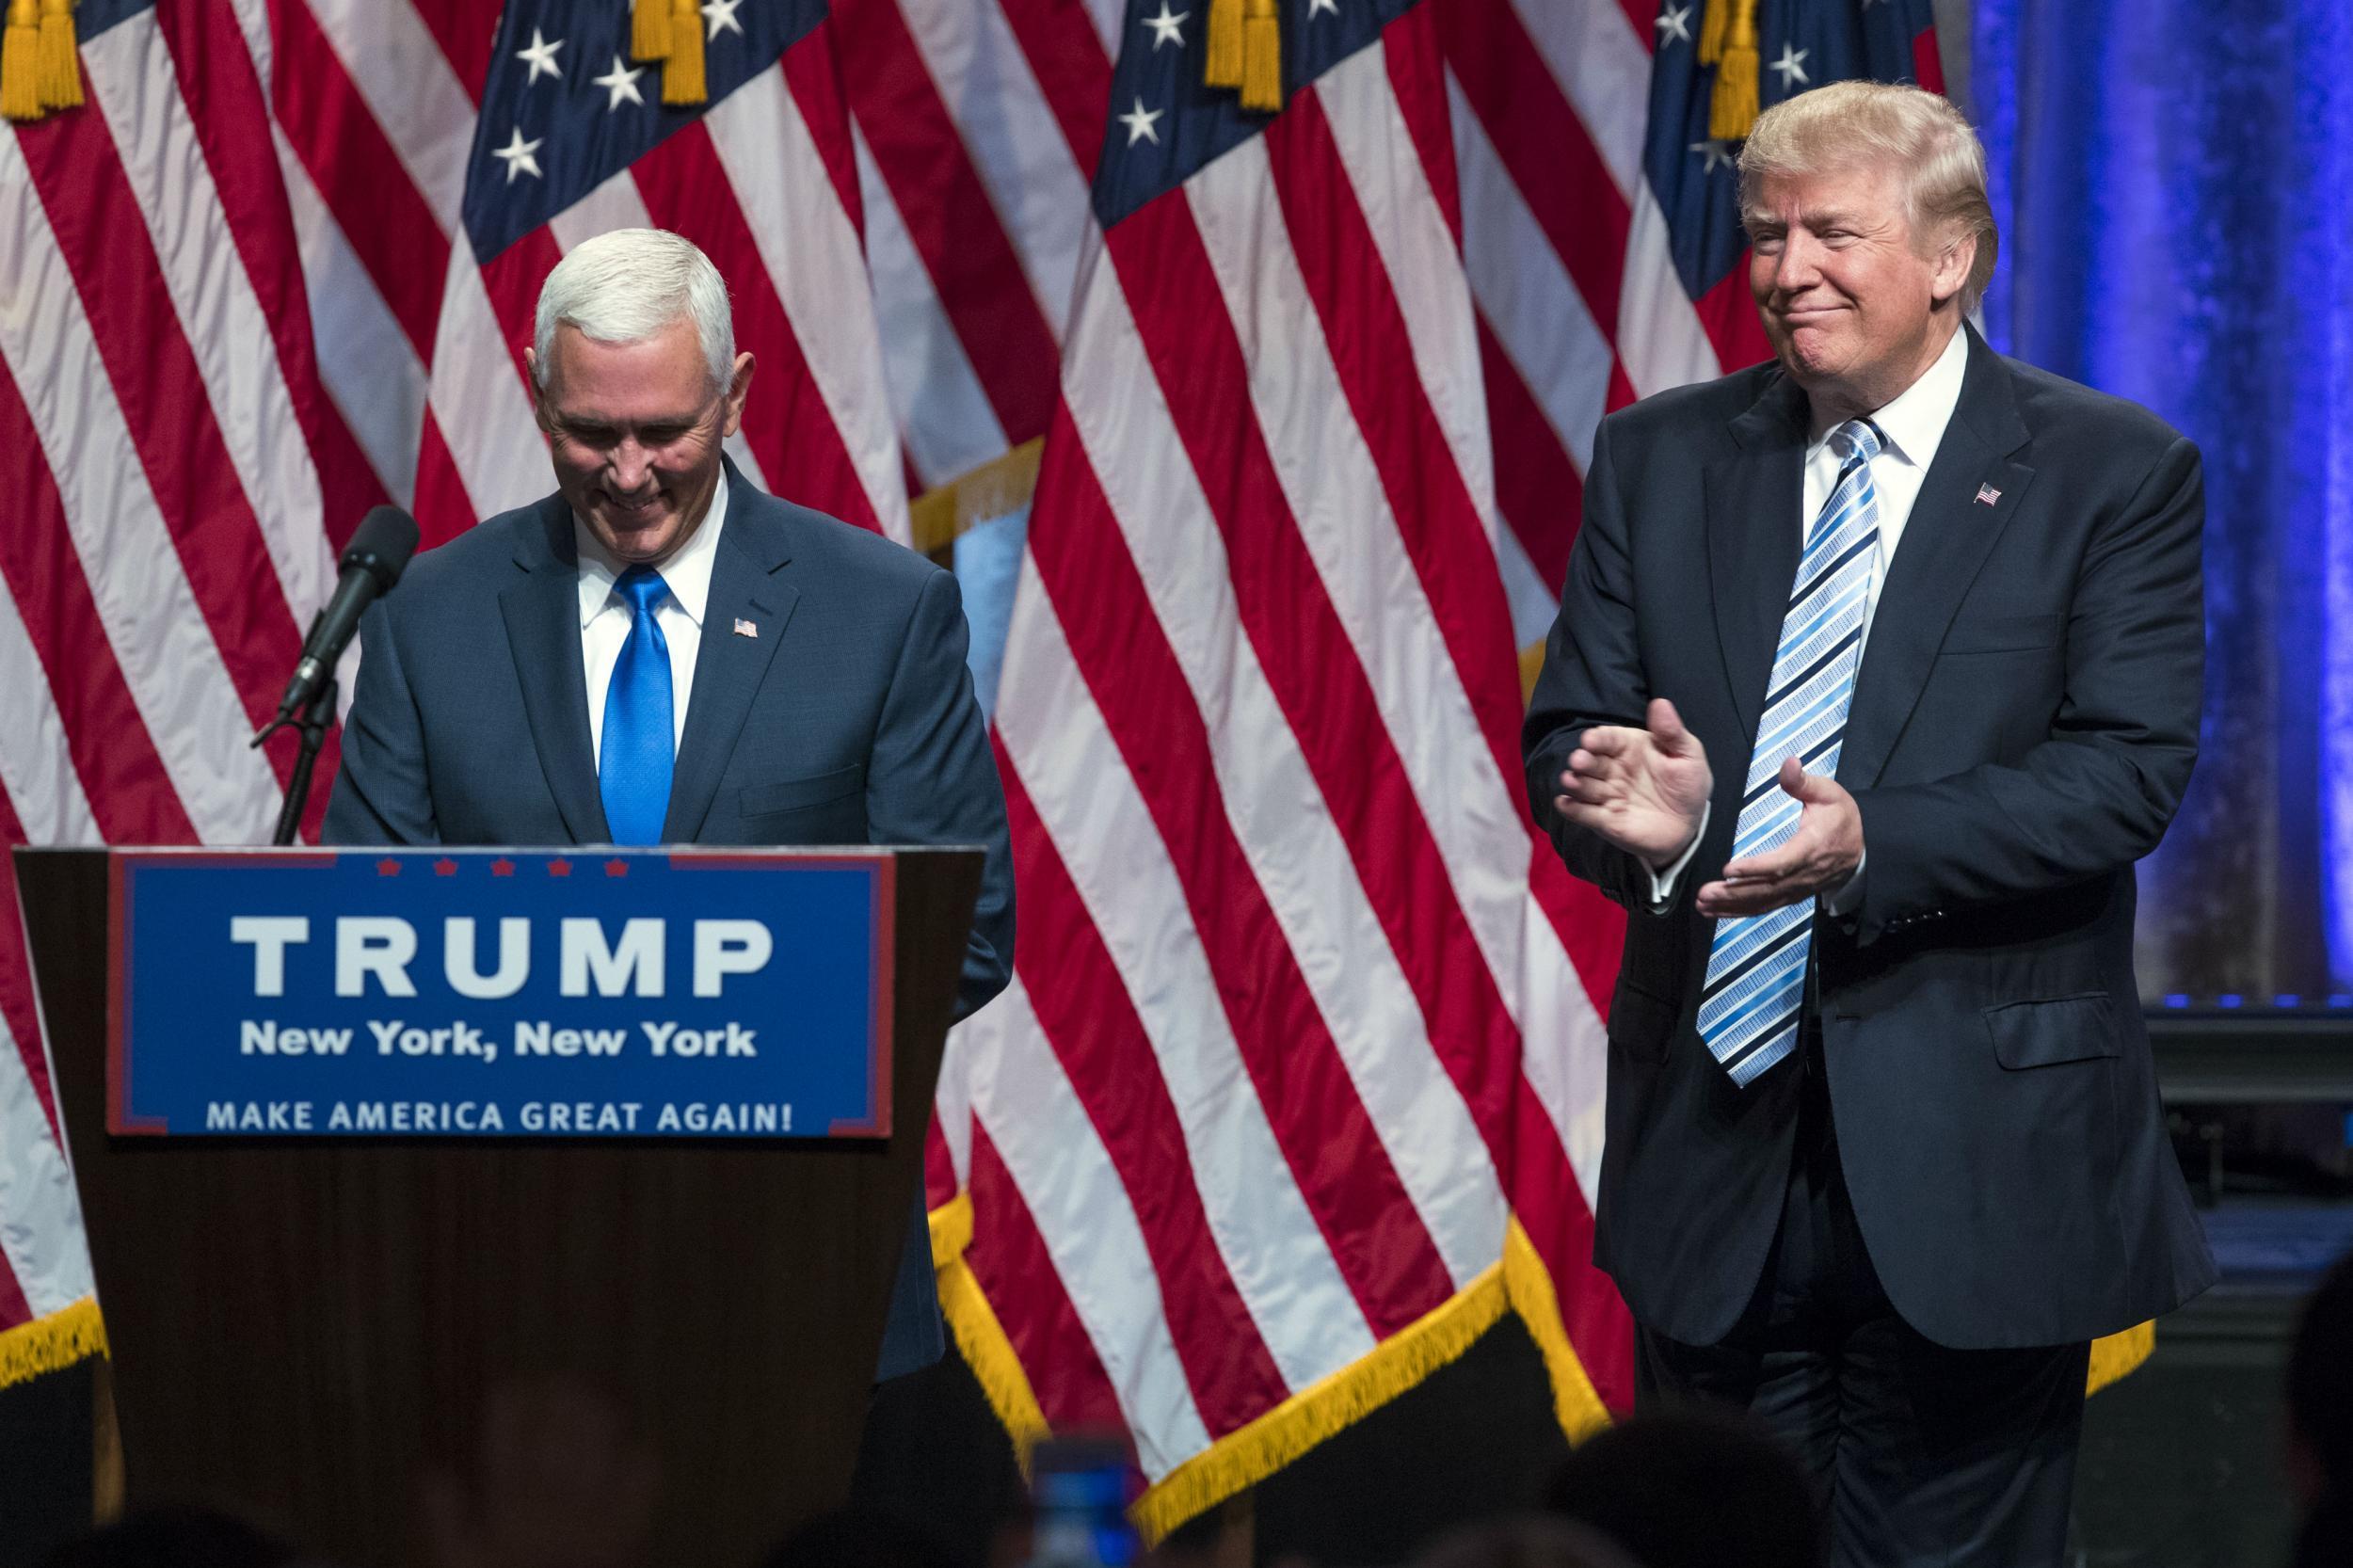 Mike Pence, Donald Trump's running mate, has a much smoother delivery than the presidential candidate